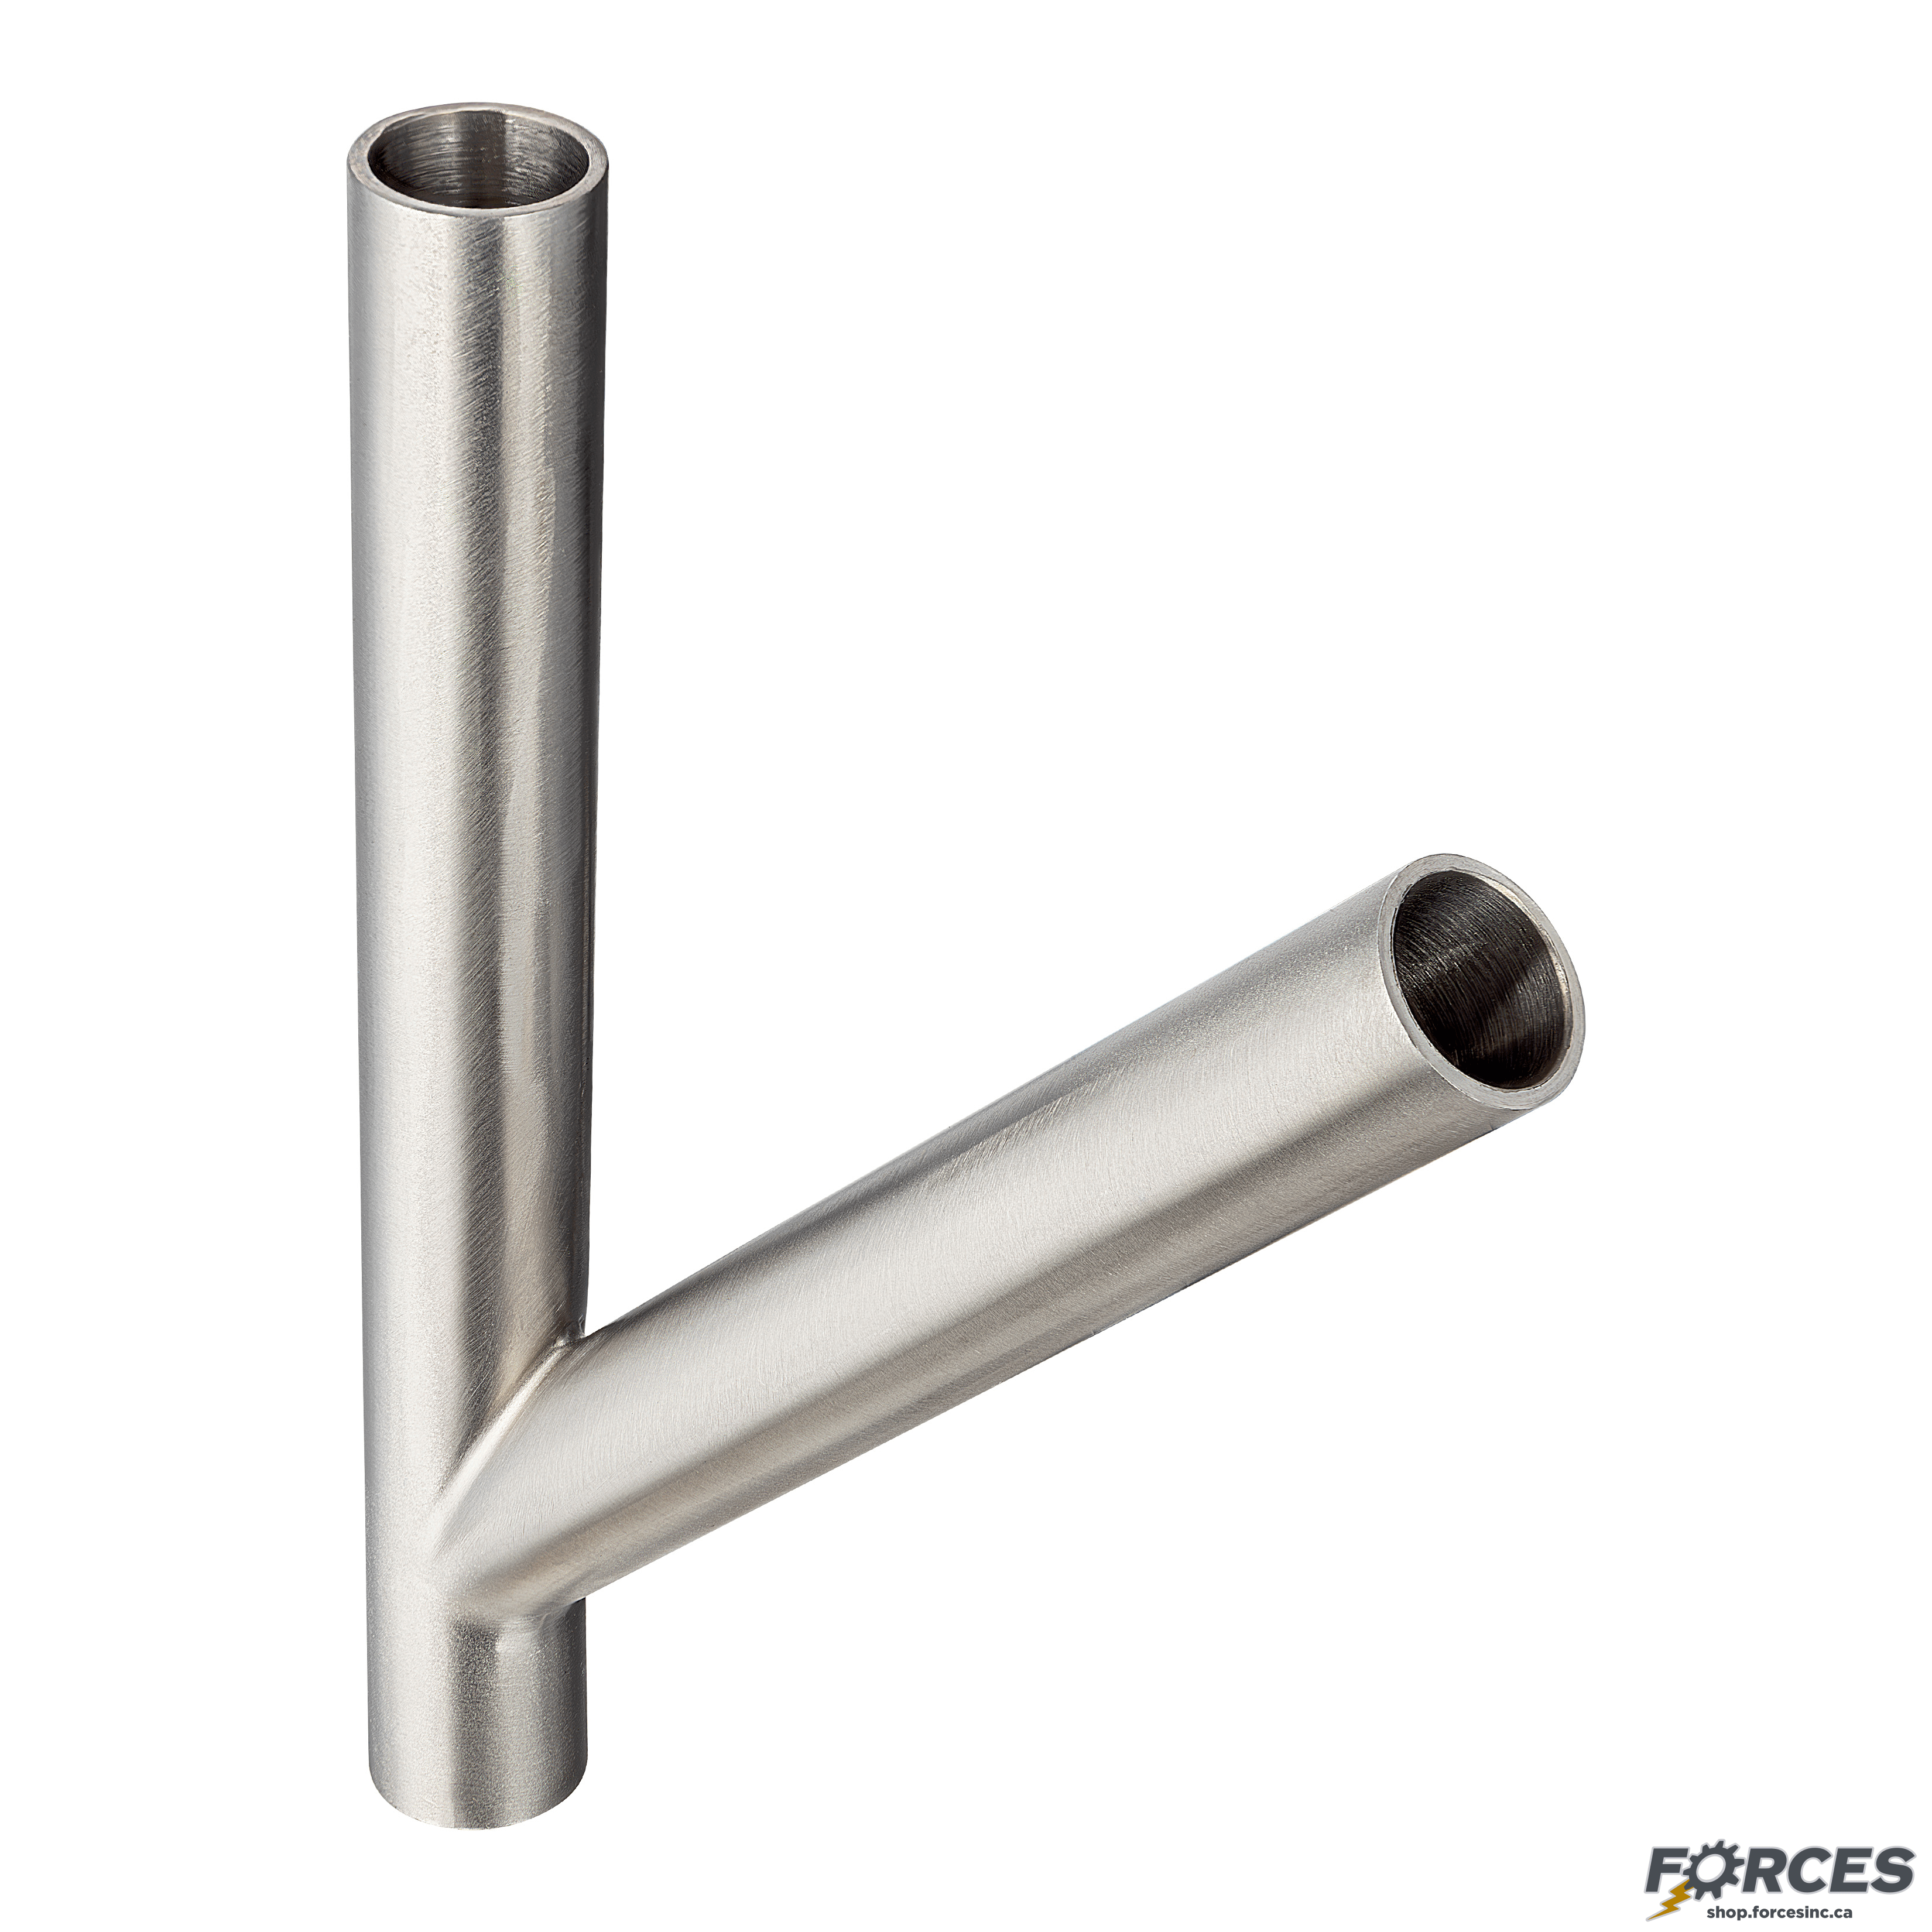 2-1/2" Butt Weld 45° Lateral Wye - Stainless Steel 316 - Forces Inc